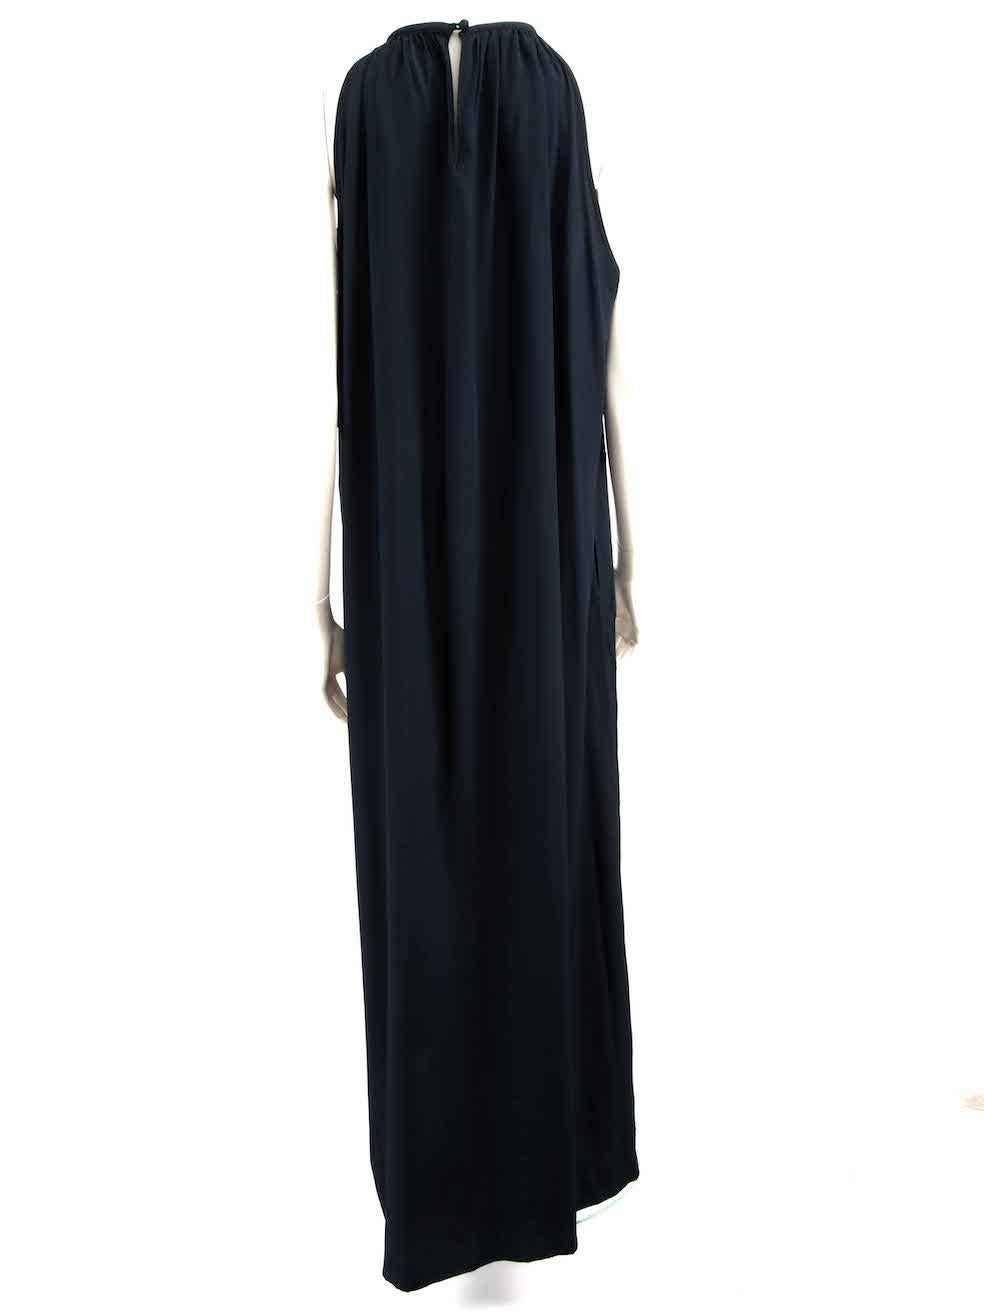 Bella Freud Navy Silk Maxi Dress Size XL In New Condition For Sale In London, GB